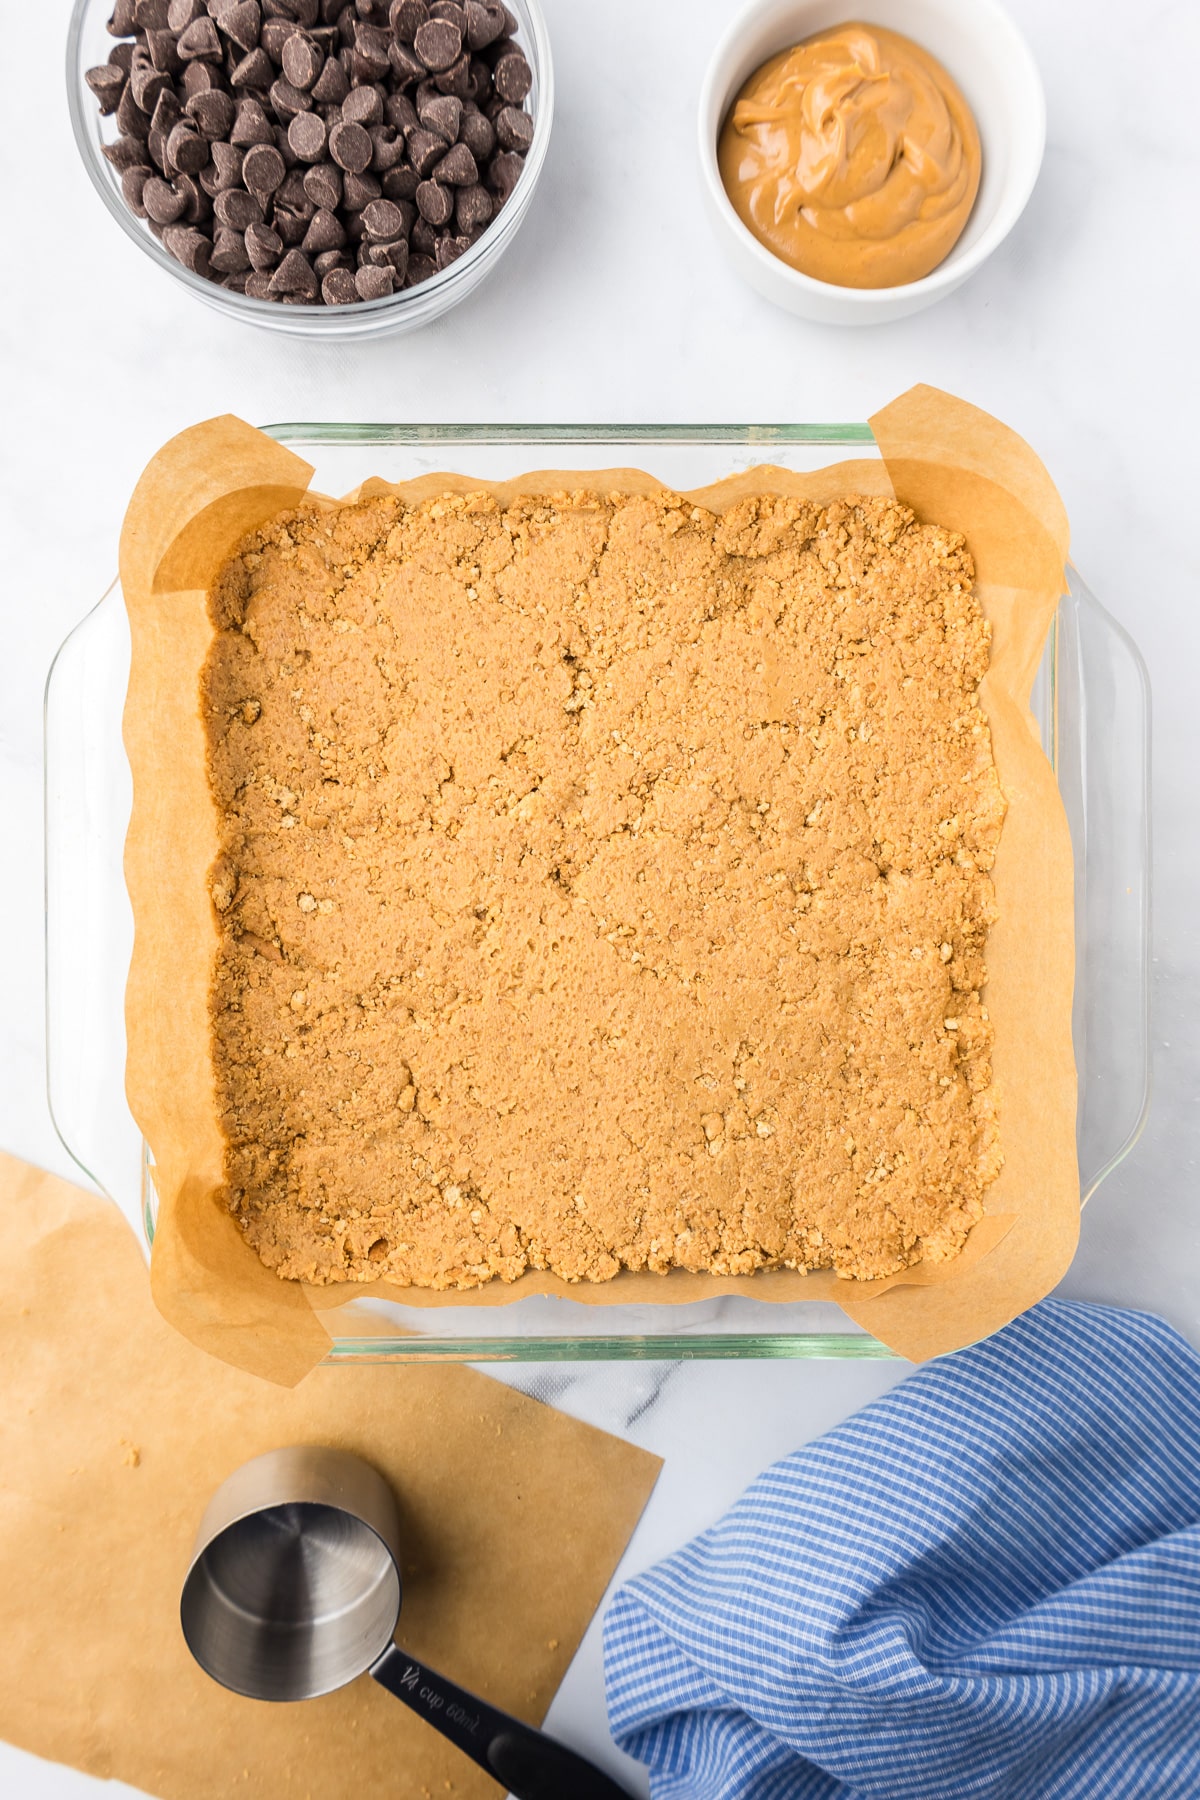 Peanut butter graham cracker mixture in a square pan from above with a measuring cup and parchment paper on the counter nearby.